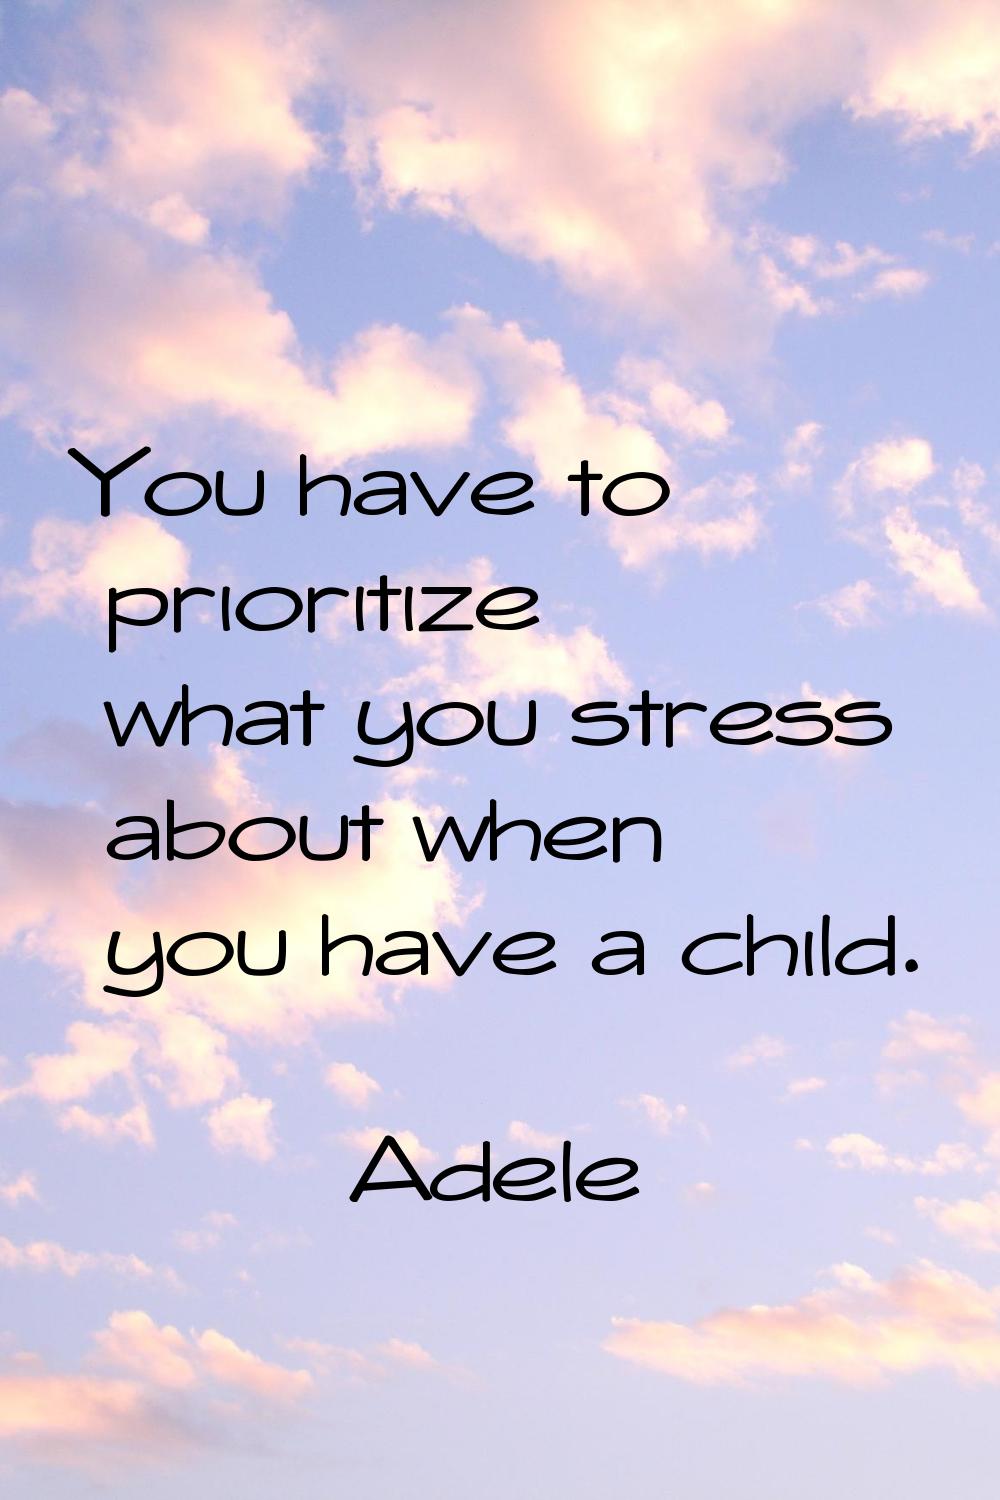 You have to prioritize what you stress about when you have a child.